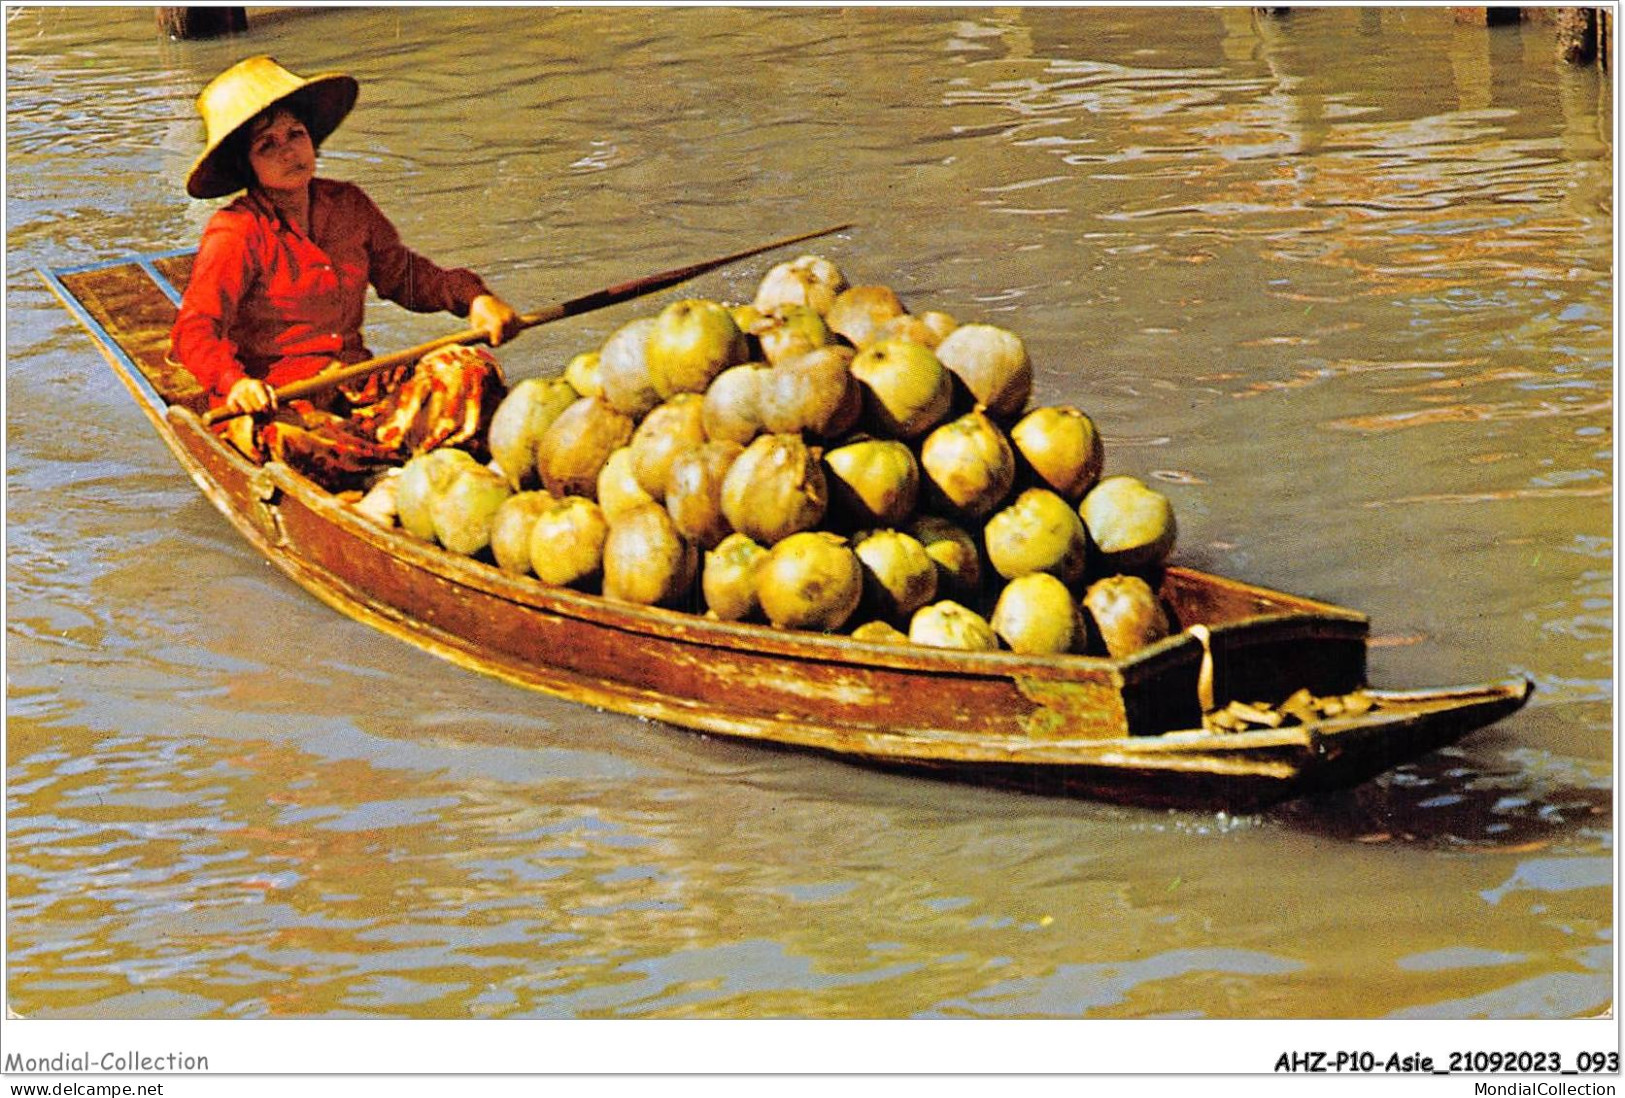 AHZP10-ASIE-0917 - THAI BOAT-VENDORS SELLING FRUITS AND VEGETABLES TO THE DWELLERS BY THE SIDES OF KHLONGS - Thaïlande